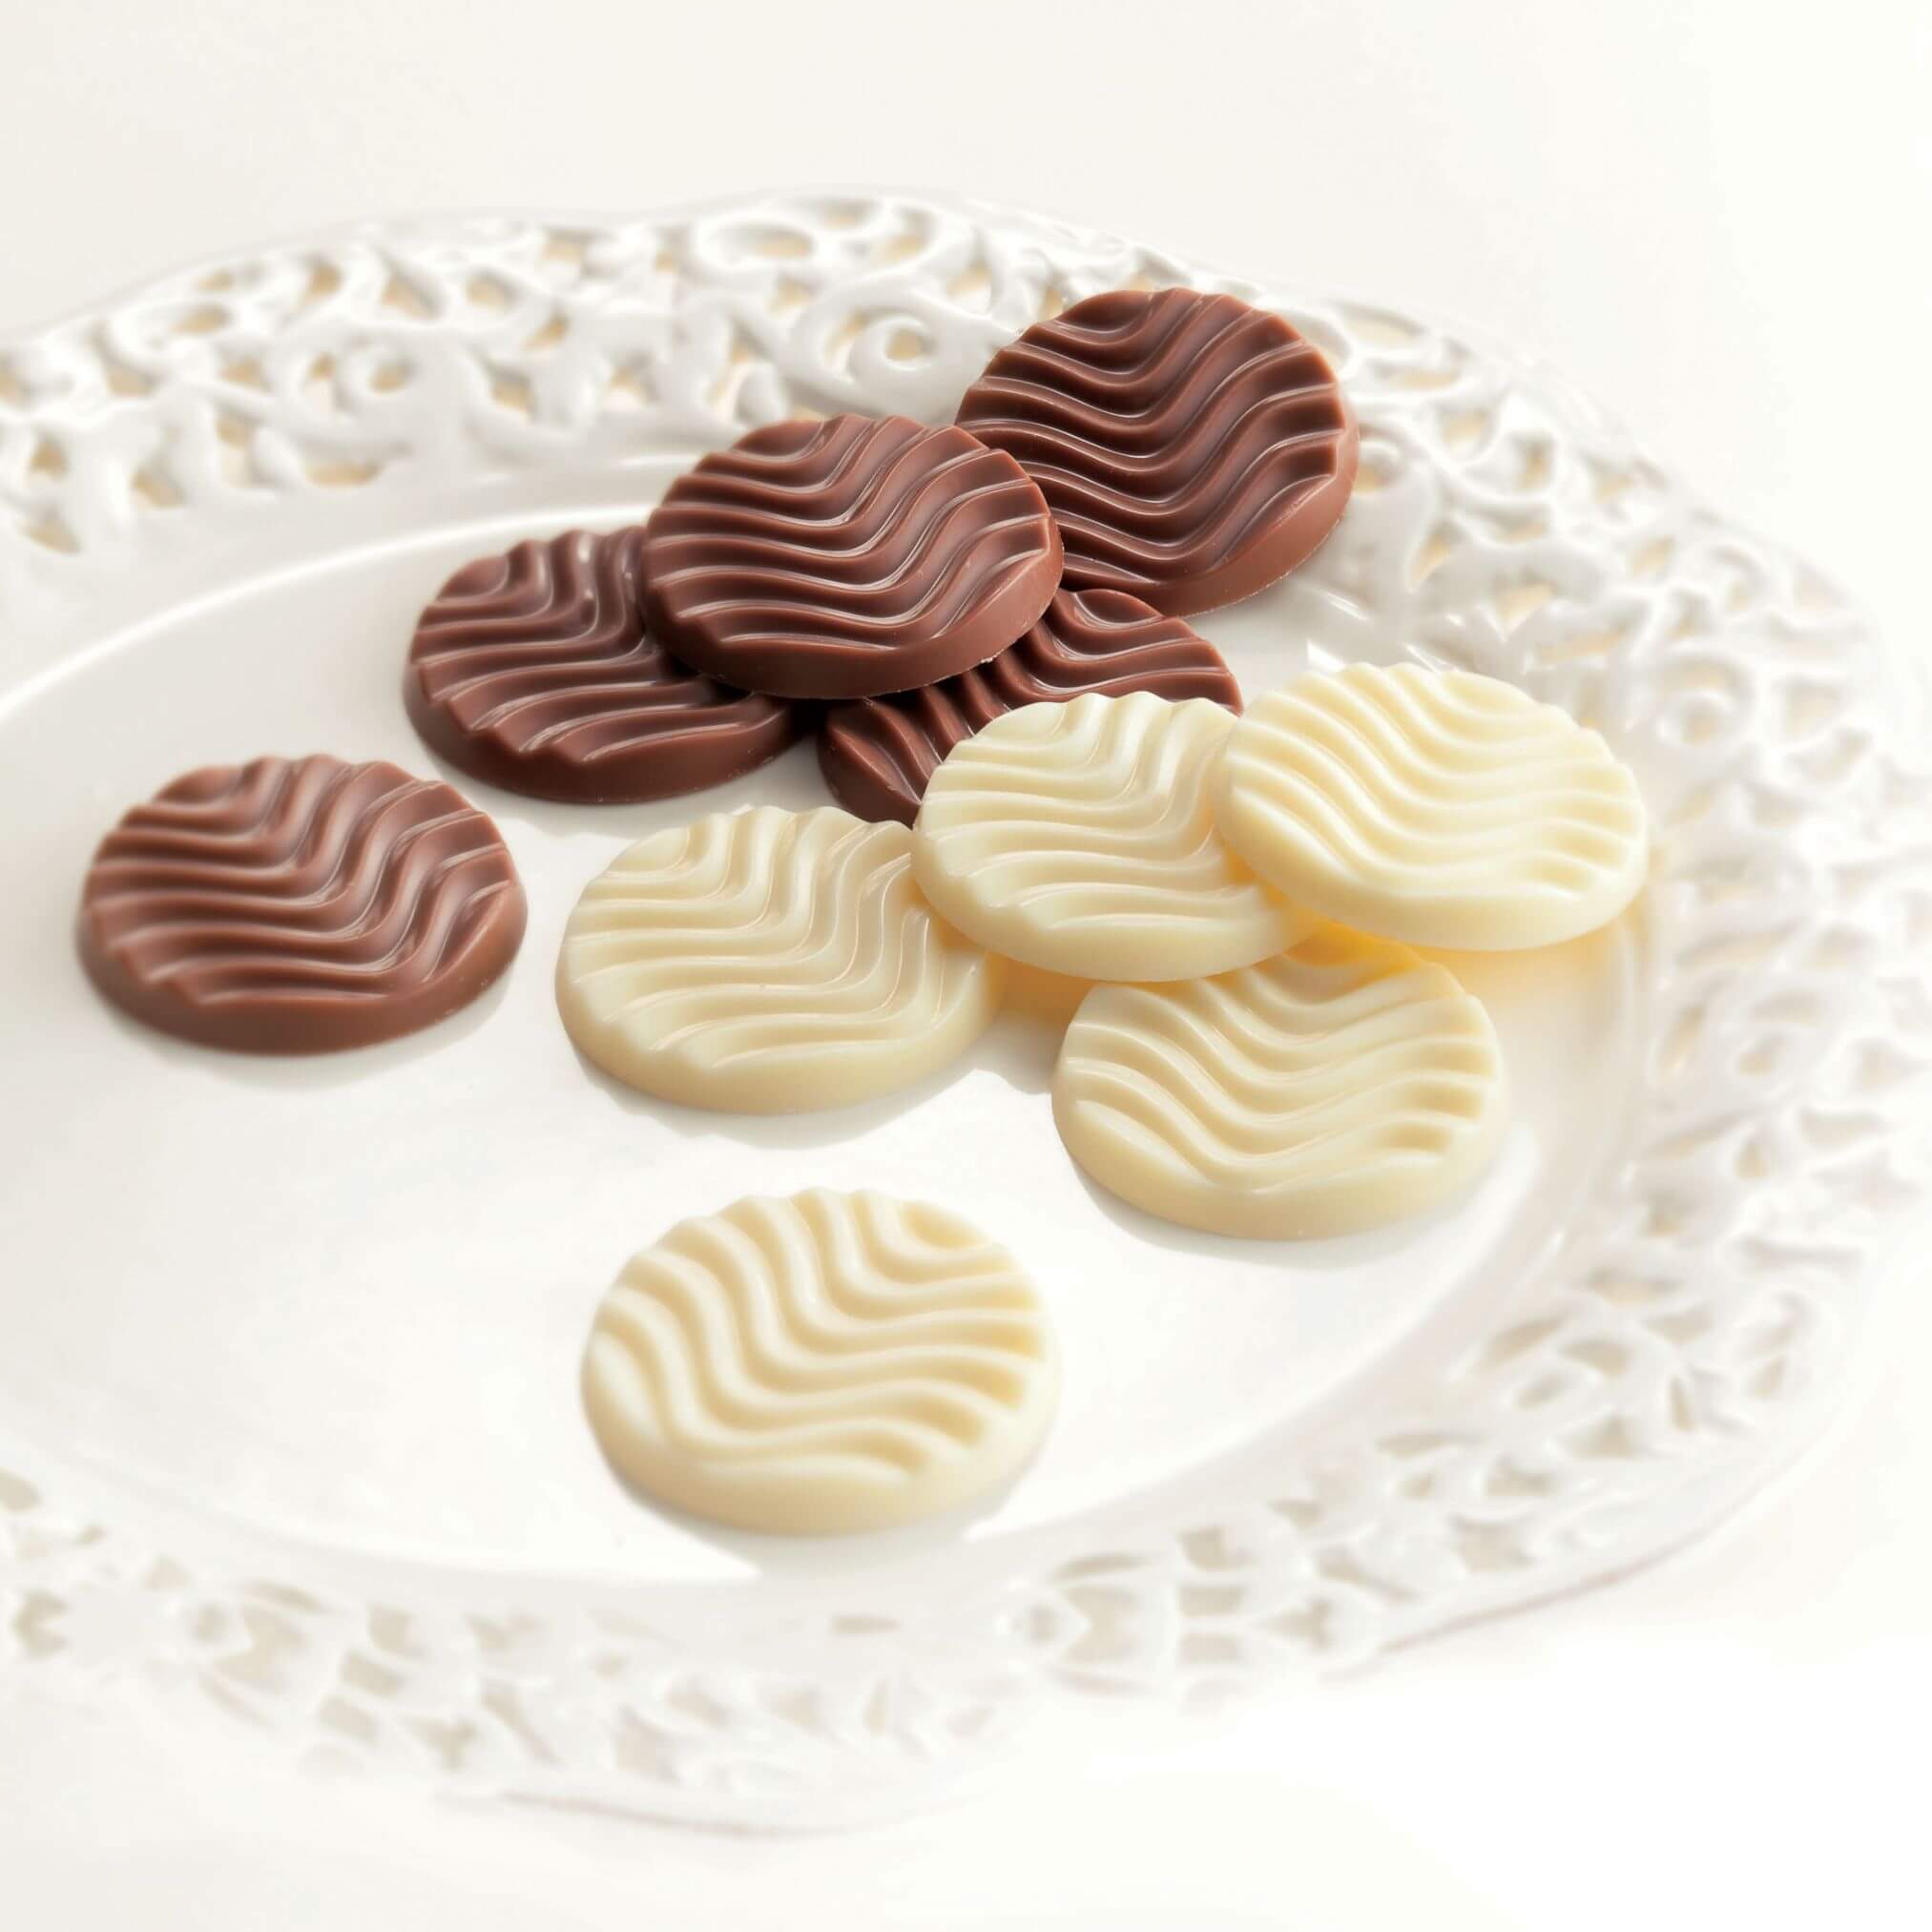 ROYCE' Chocolate - Pure Chocolate "Creamy Milk & White" - Image shows brown and white chocolate discs with a waved texture on a white plate with engravings. Background is in white color.